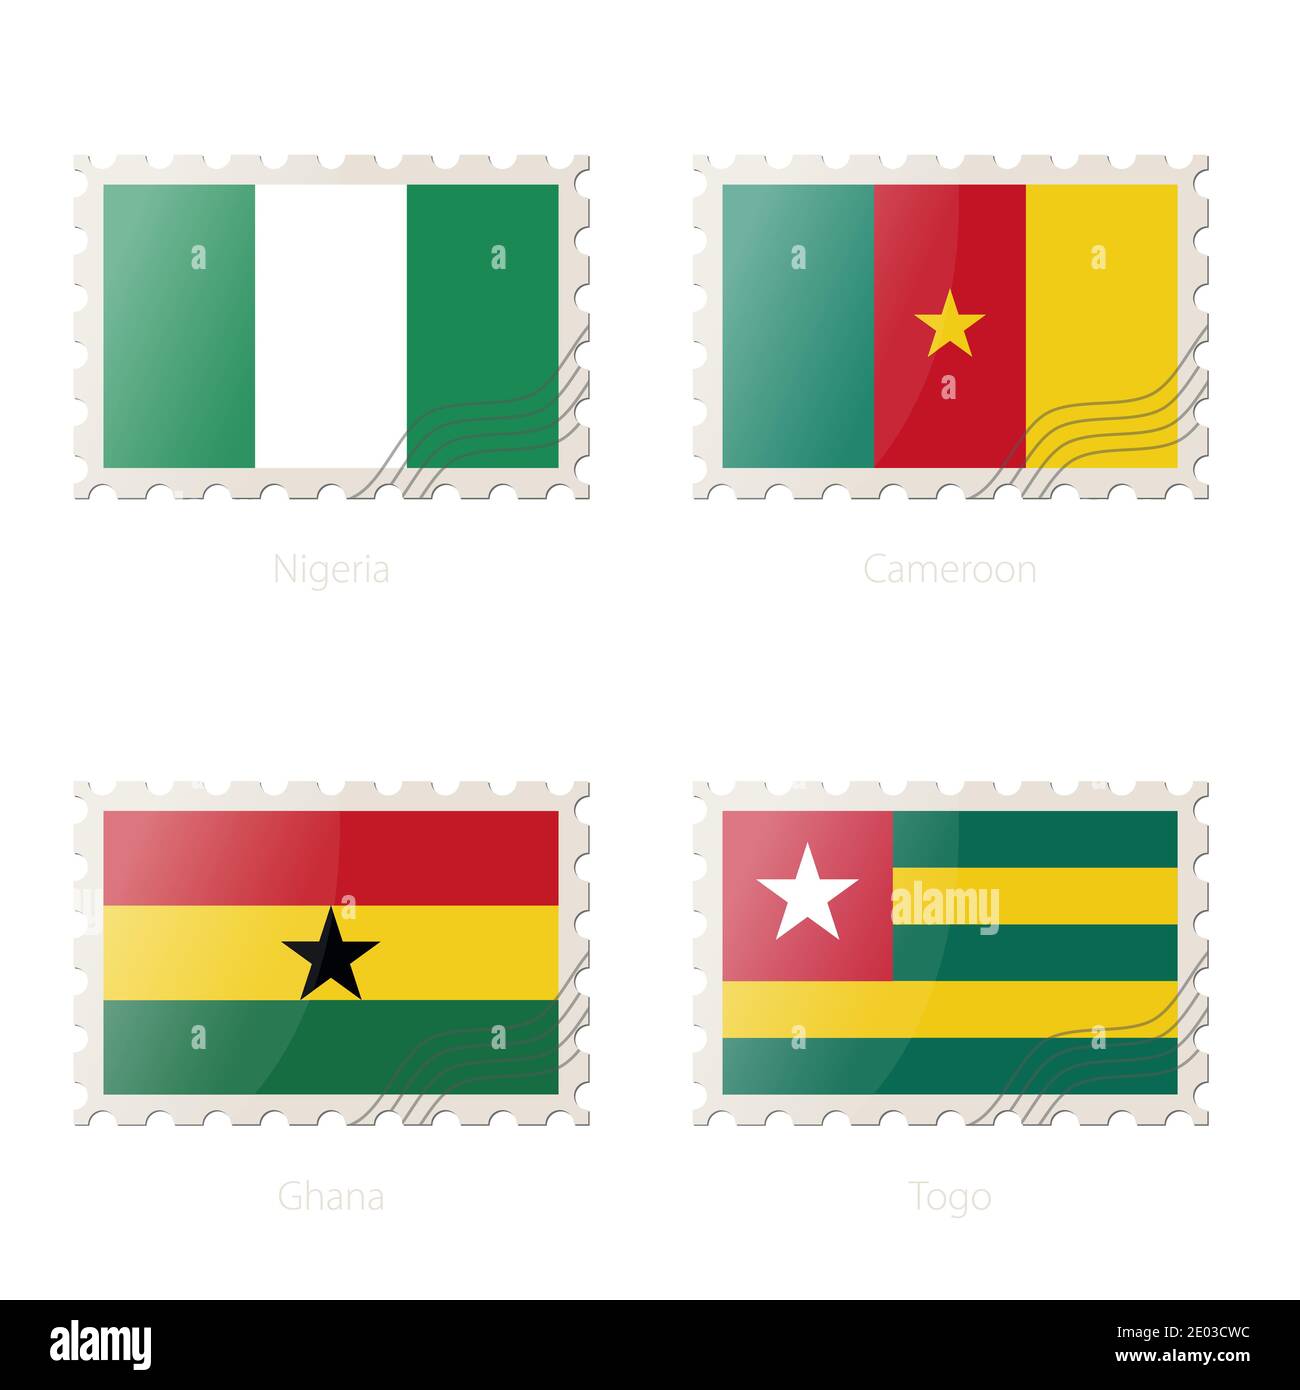 Postage stamp with the image of Nigeria, Cameroon, Ghana, Togo flag. Vector Illustration. Stock Vector